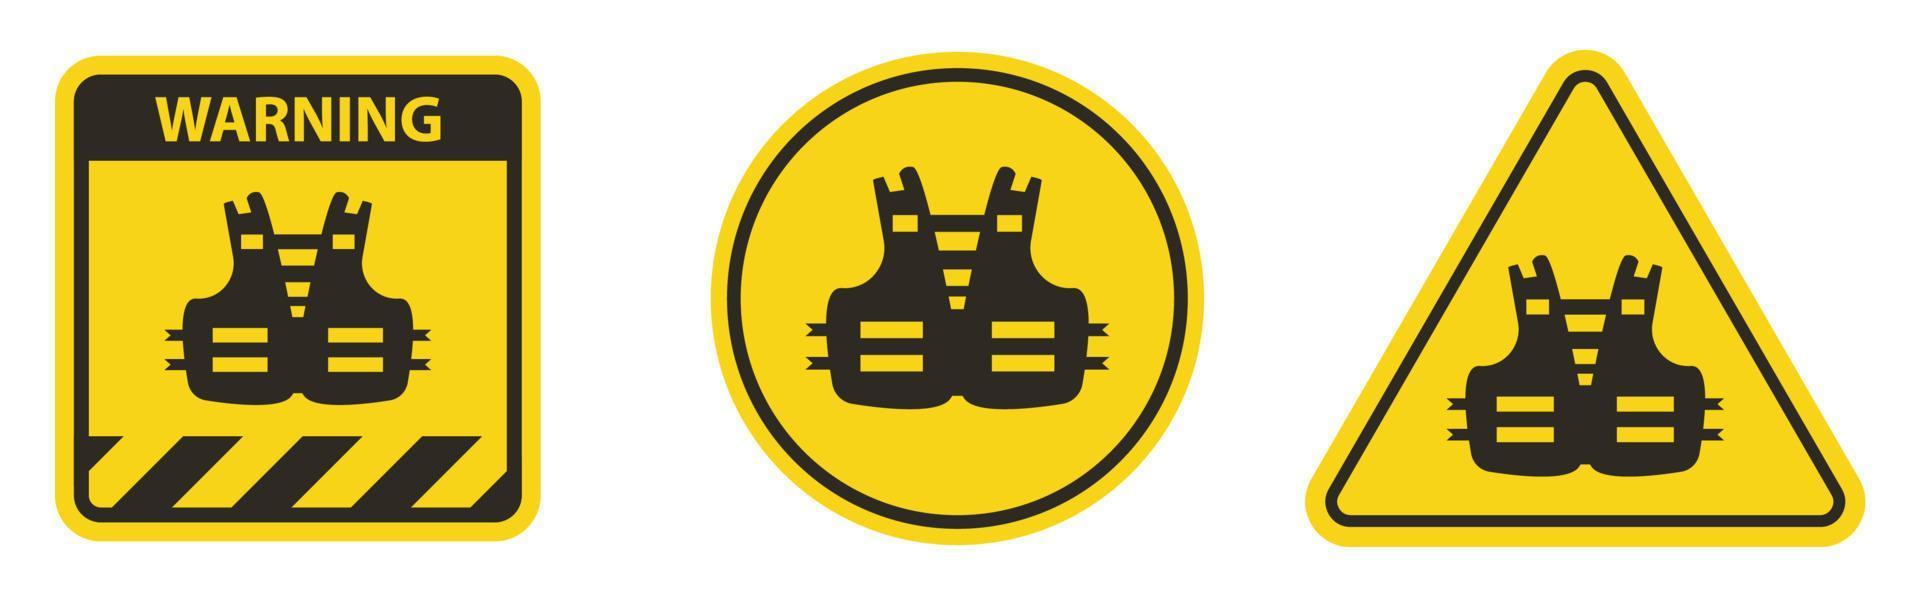 PPE Icon.Wearing a life jacket for safety Symbol Sign Isolate On White Background,Vector Illustration EPS.10 vector